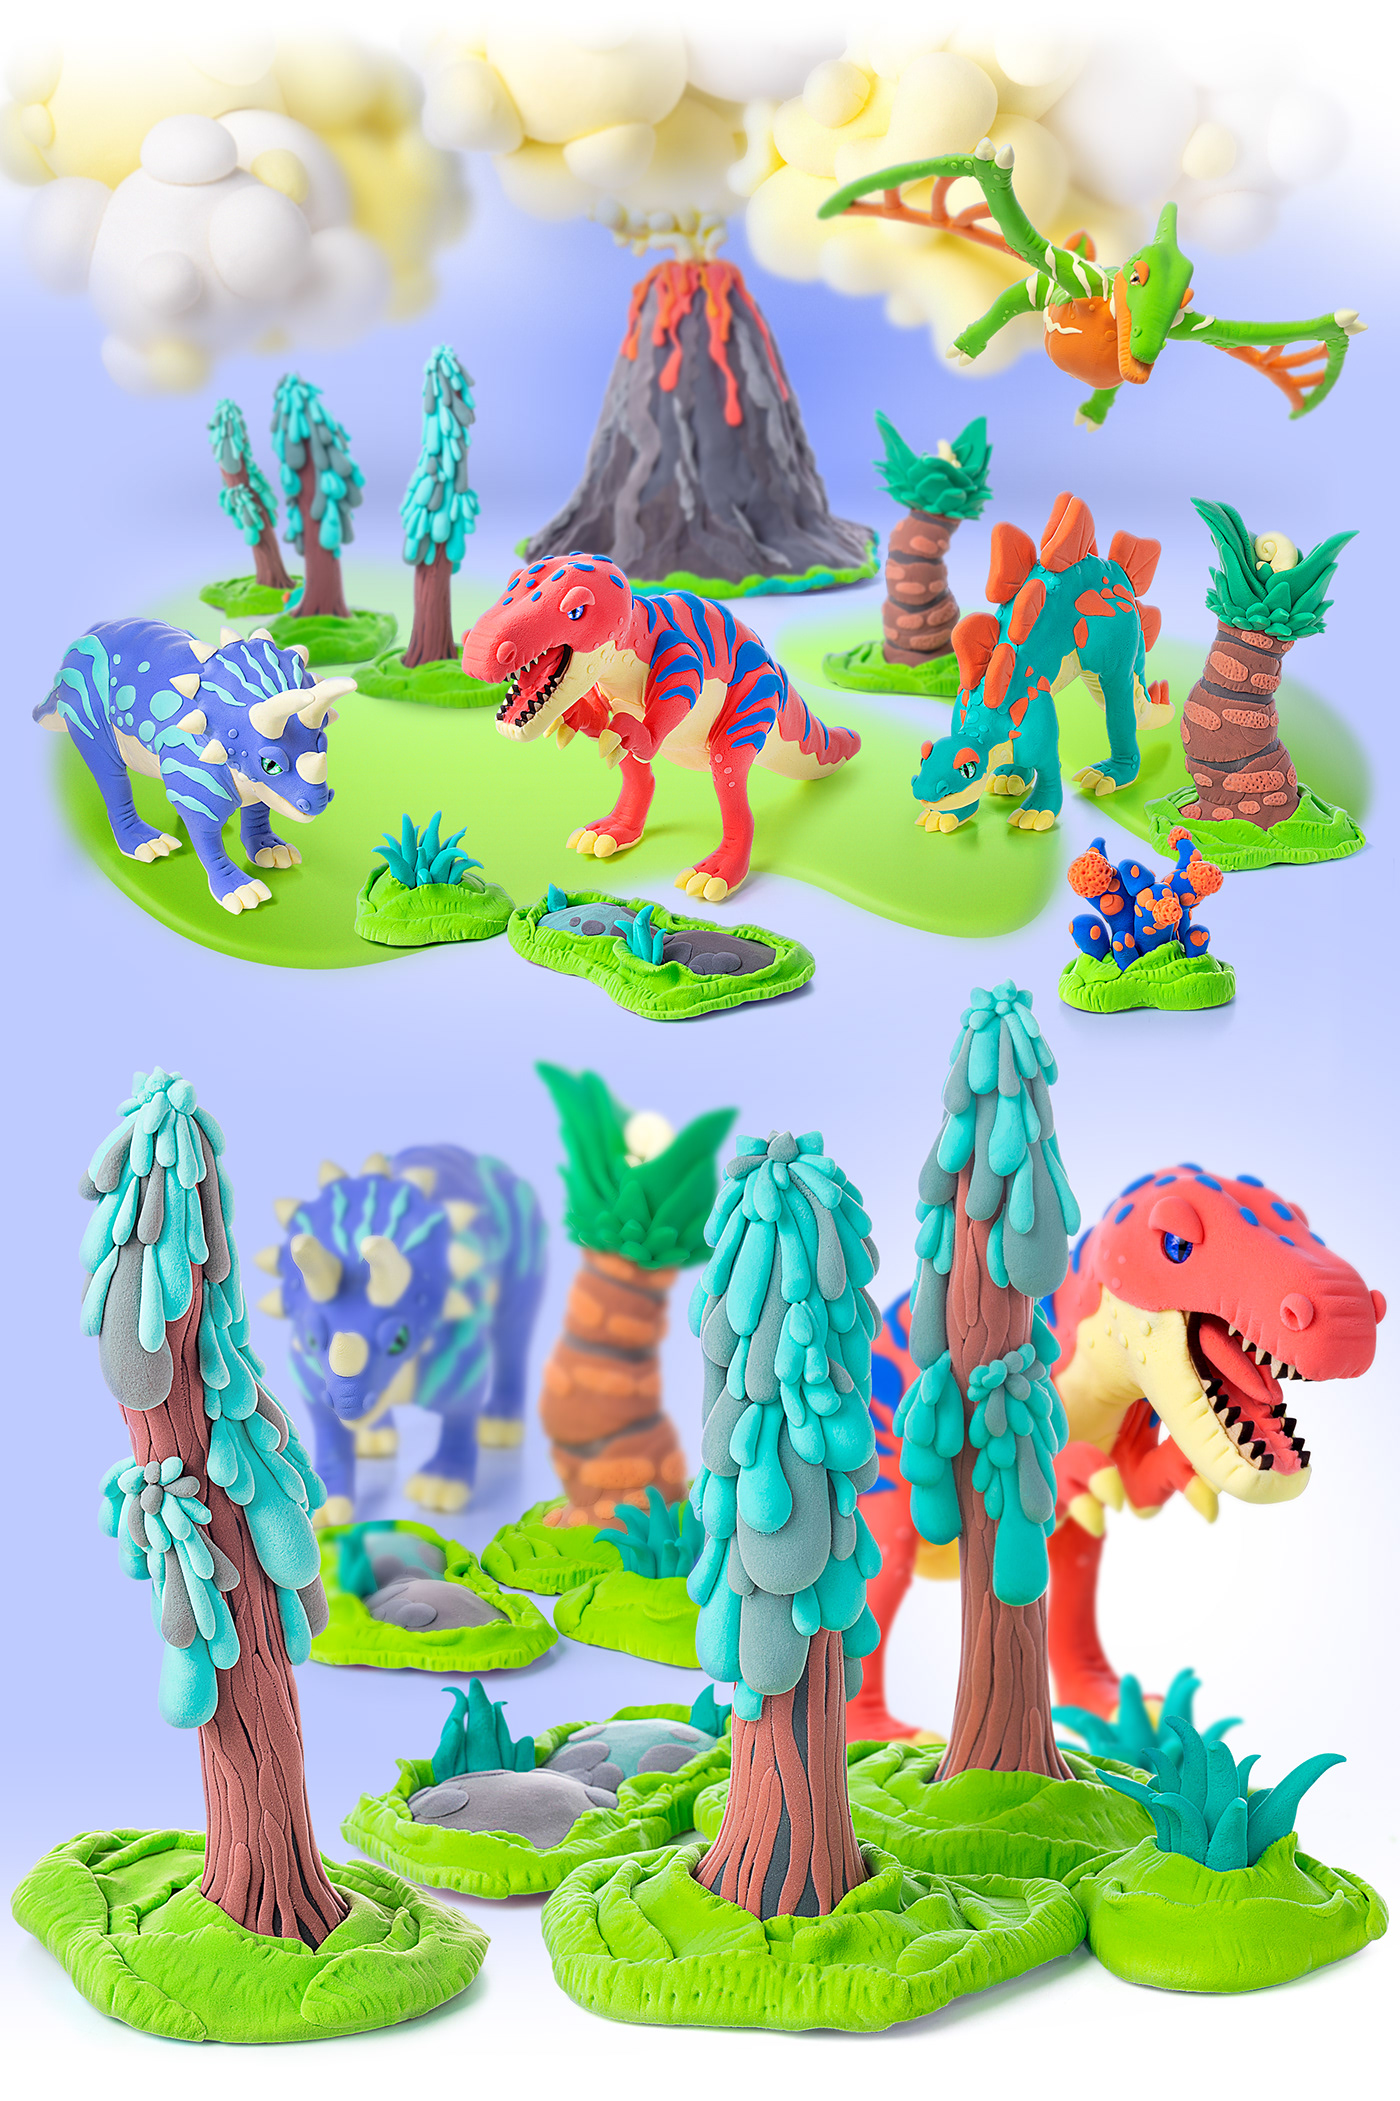 design dinosaurs gif animation modeling from plasticine package photo toy design  light clay trend world of dinosaurs